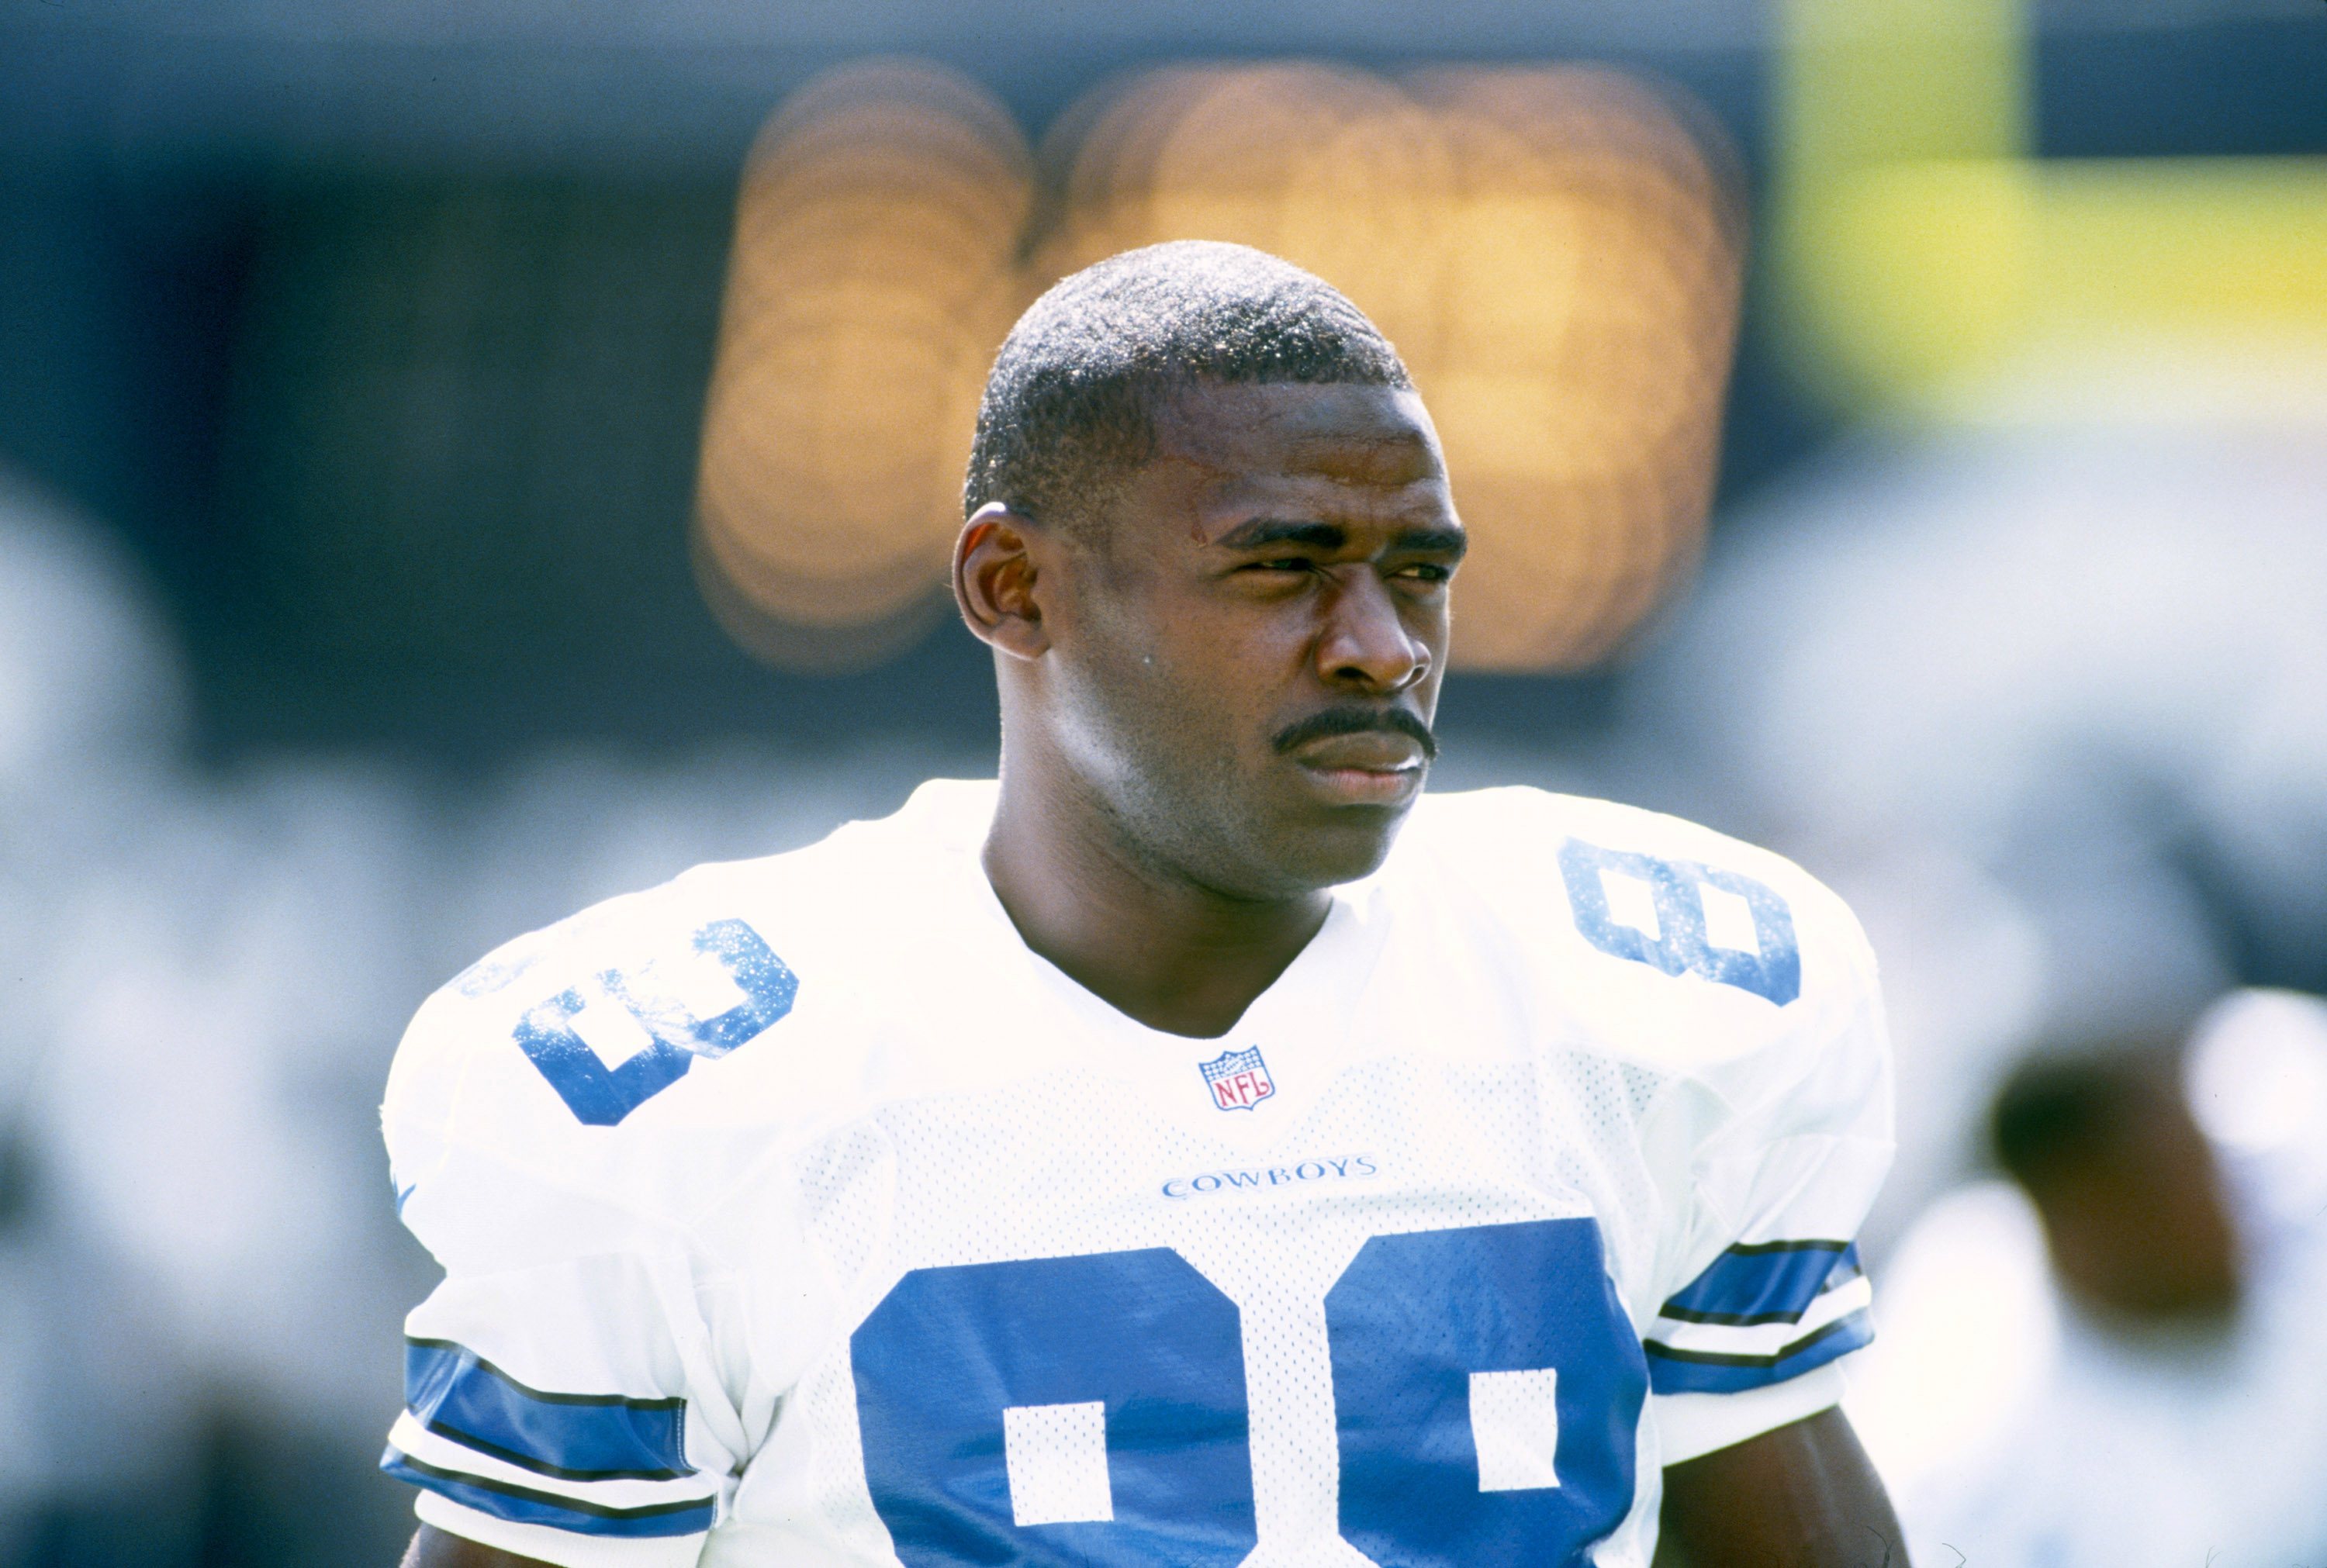 After Dallas Cowboys receiver Michael Irvin was arrested for drug possession in 1996, things took a bizarre and dark twist when he became the intended target in a murder-for-hire plot.